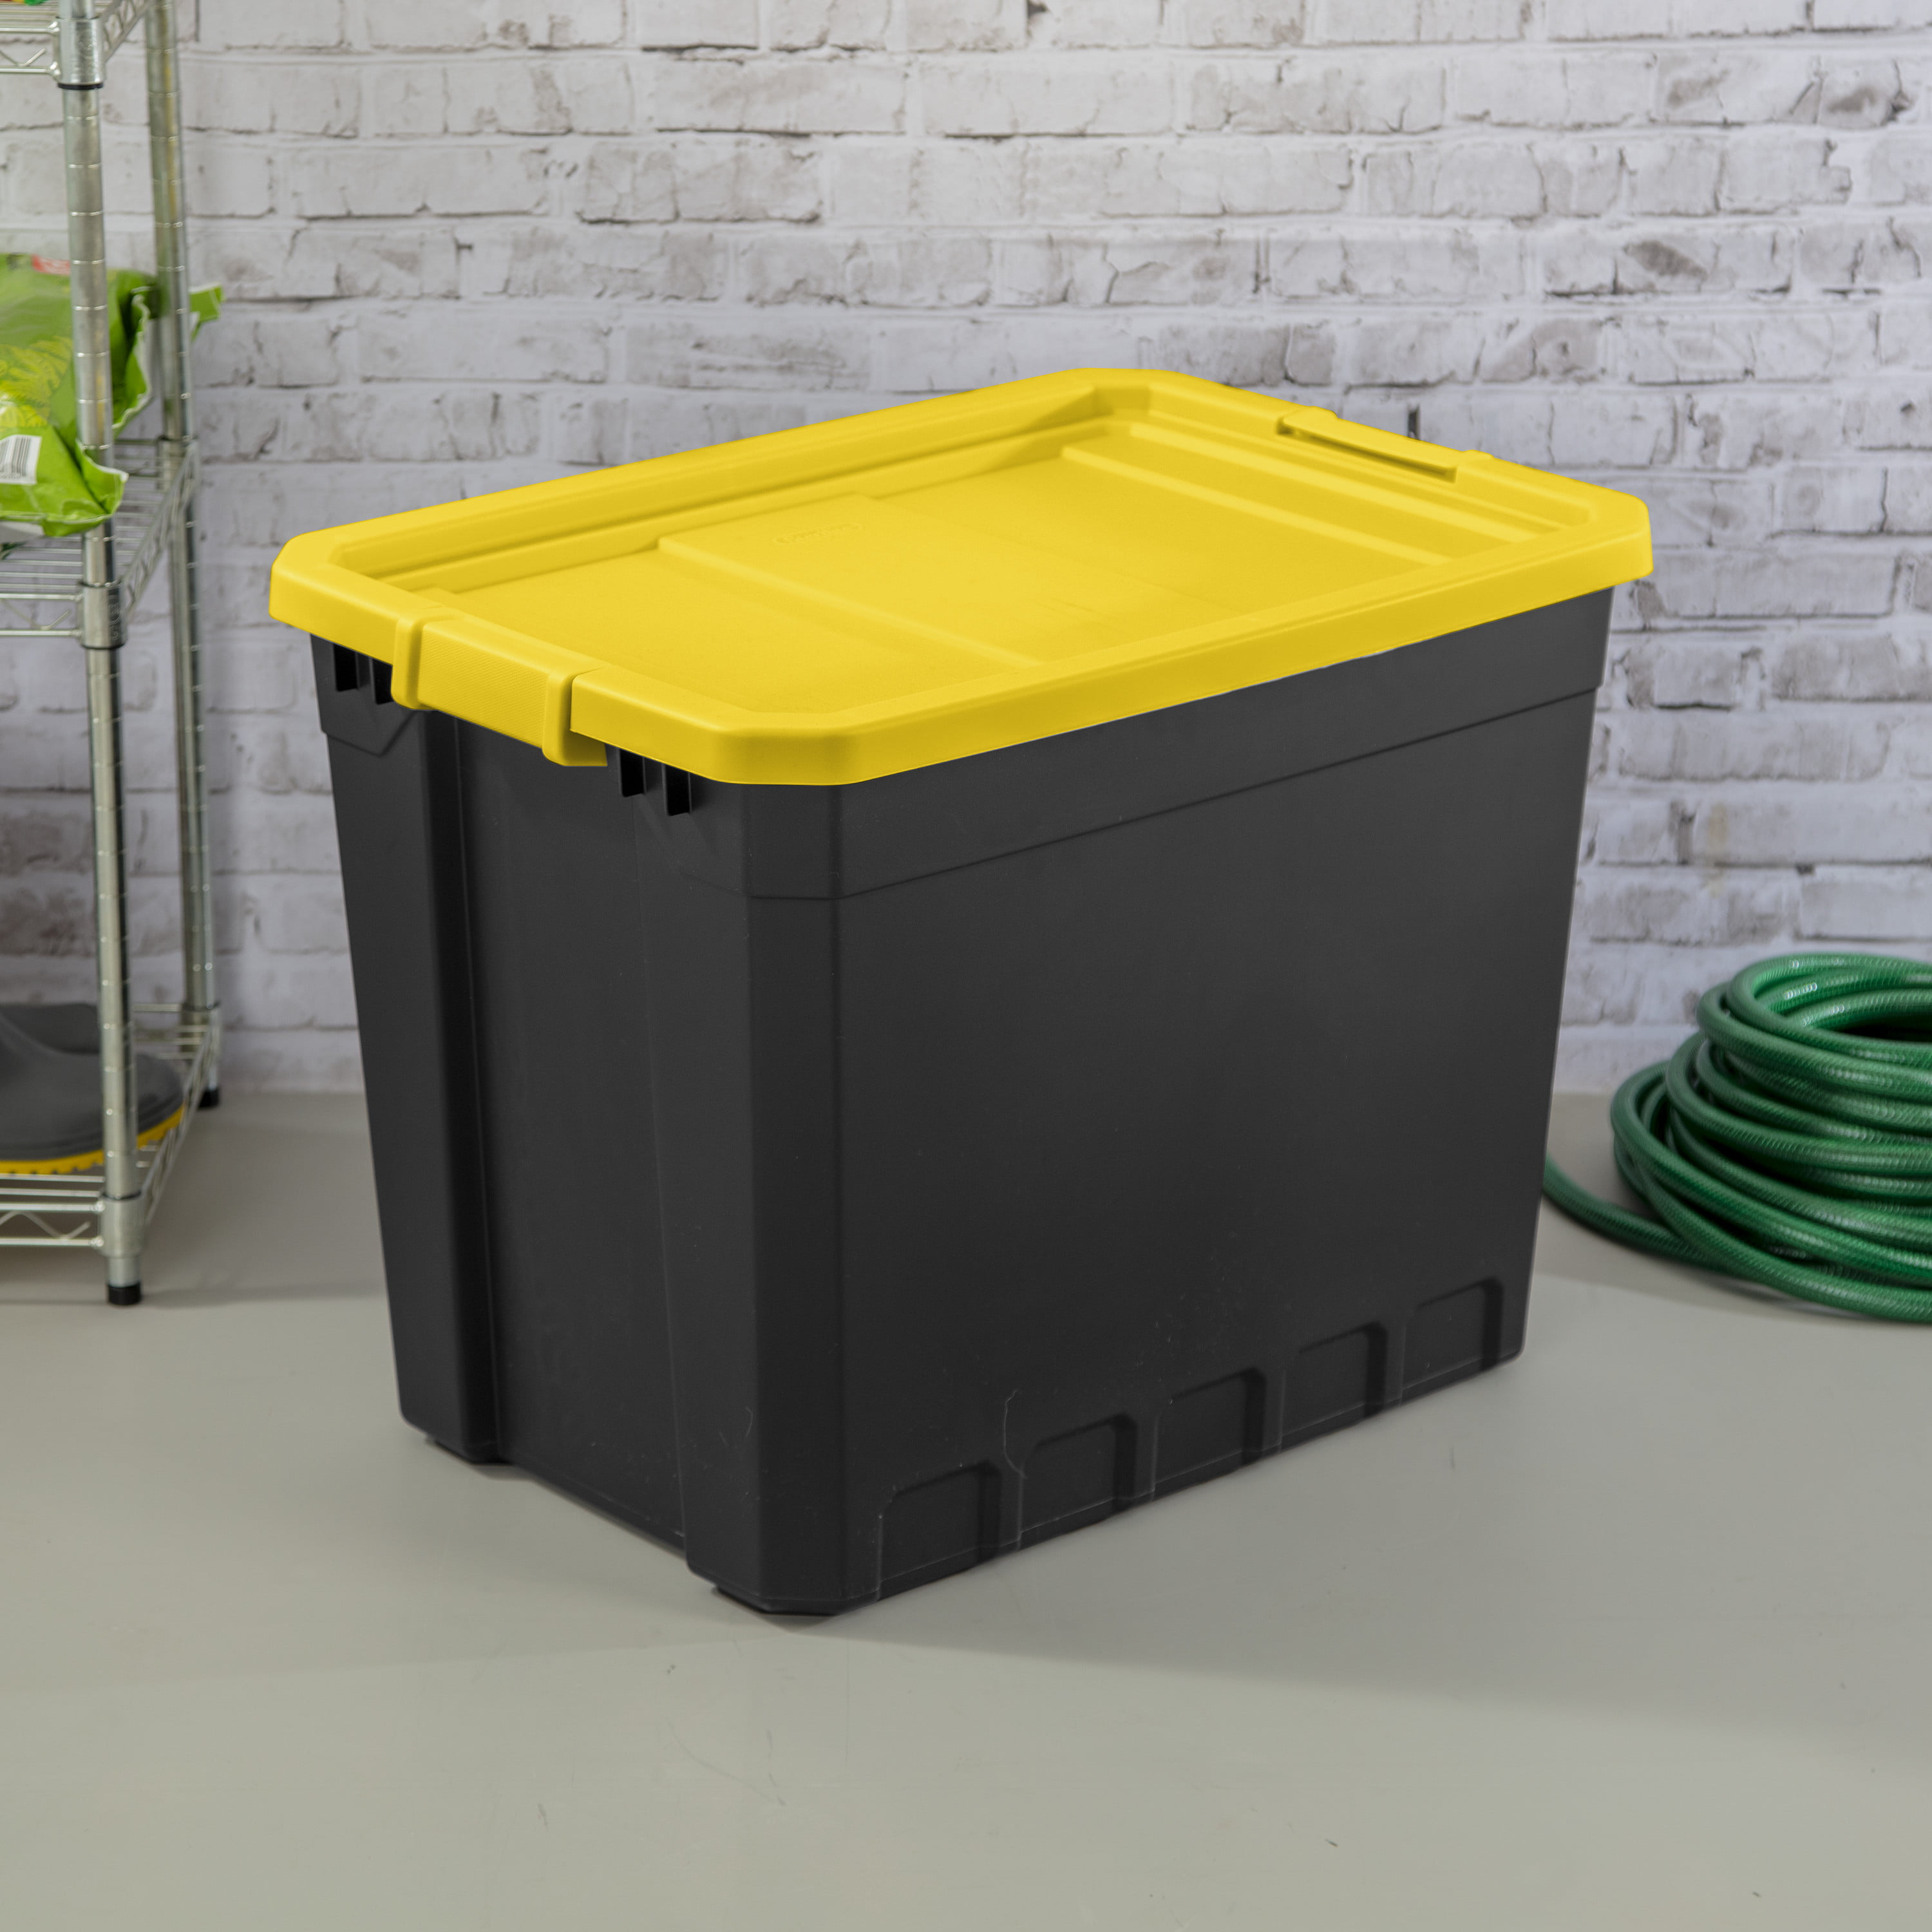 Sterilite 1466 - 27 Gal. Industrial Tote Yellow Lily 14669Y04